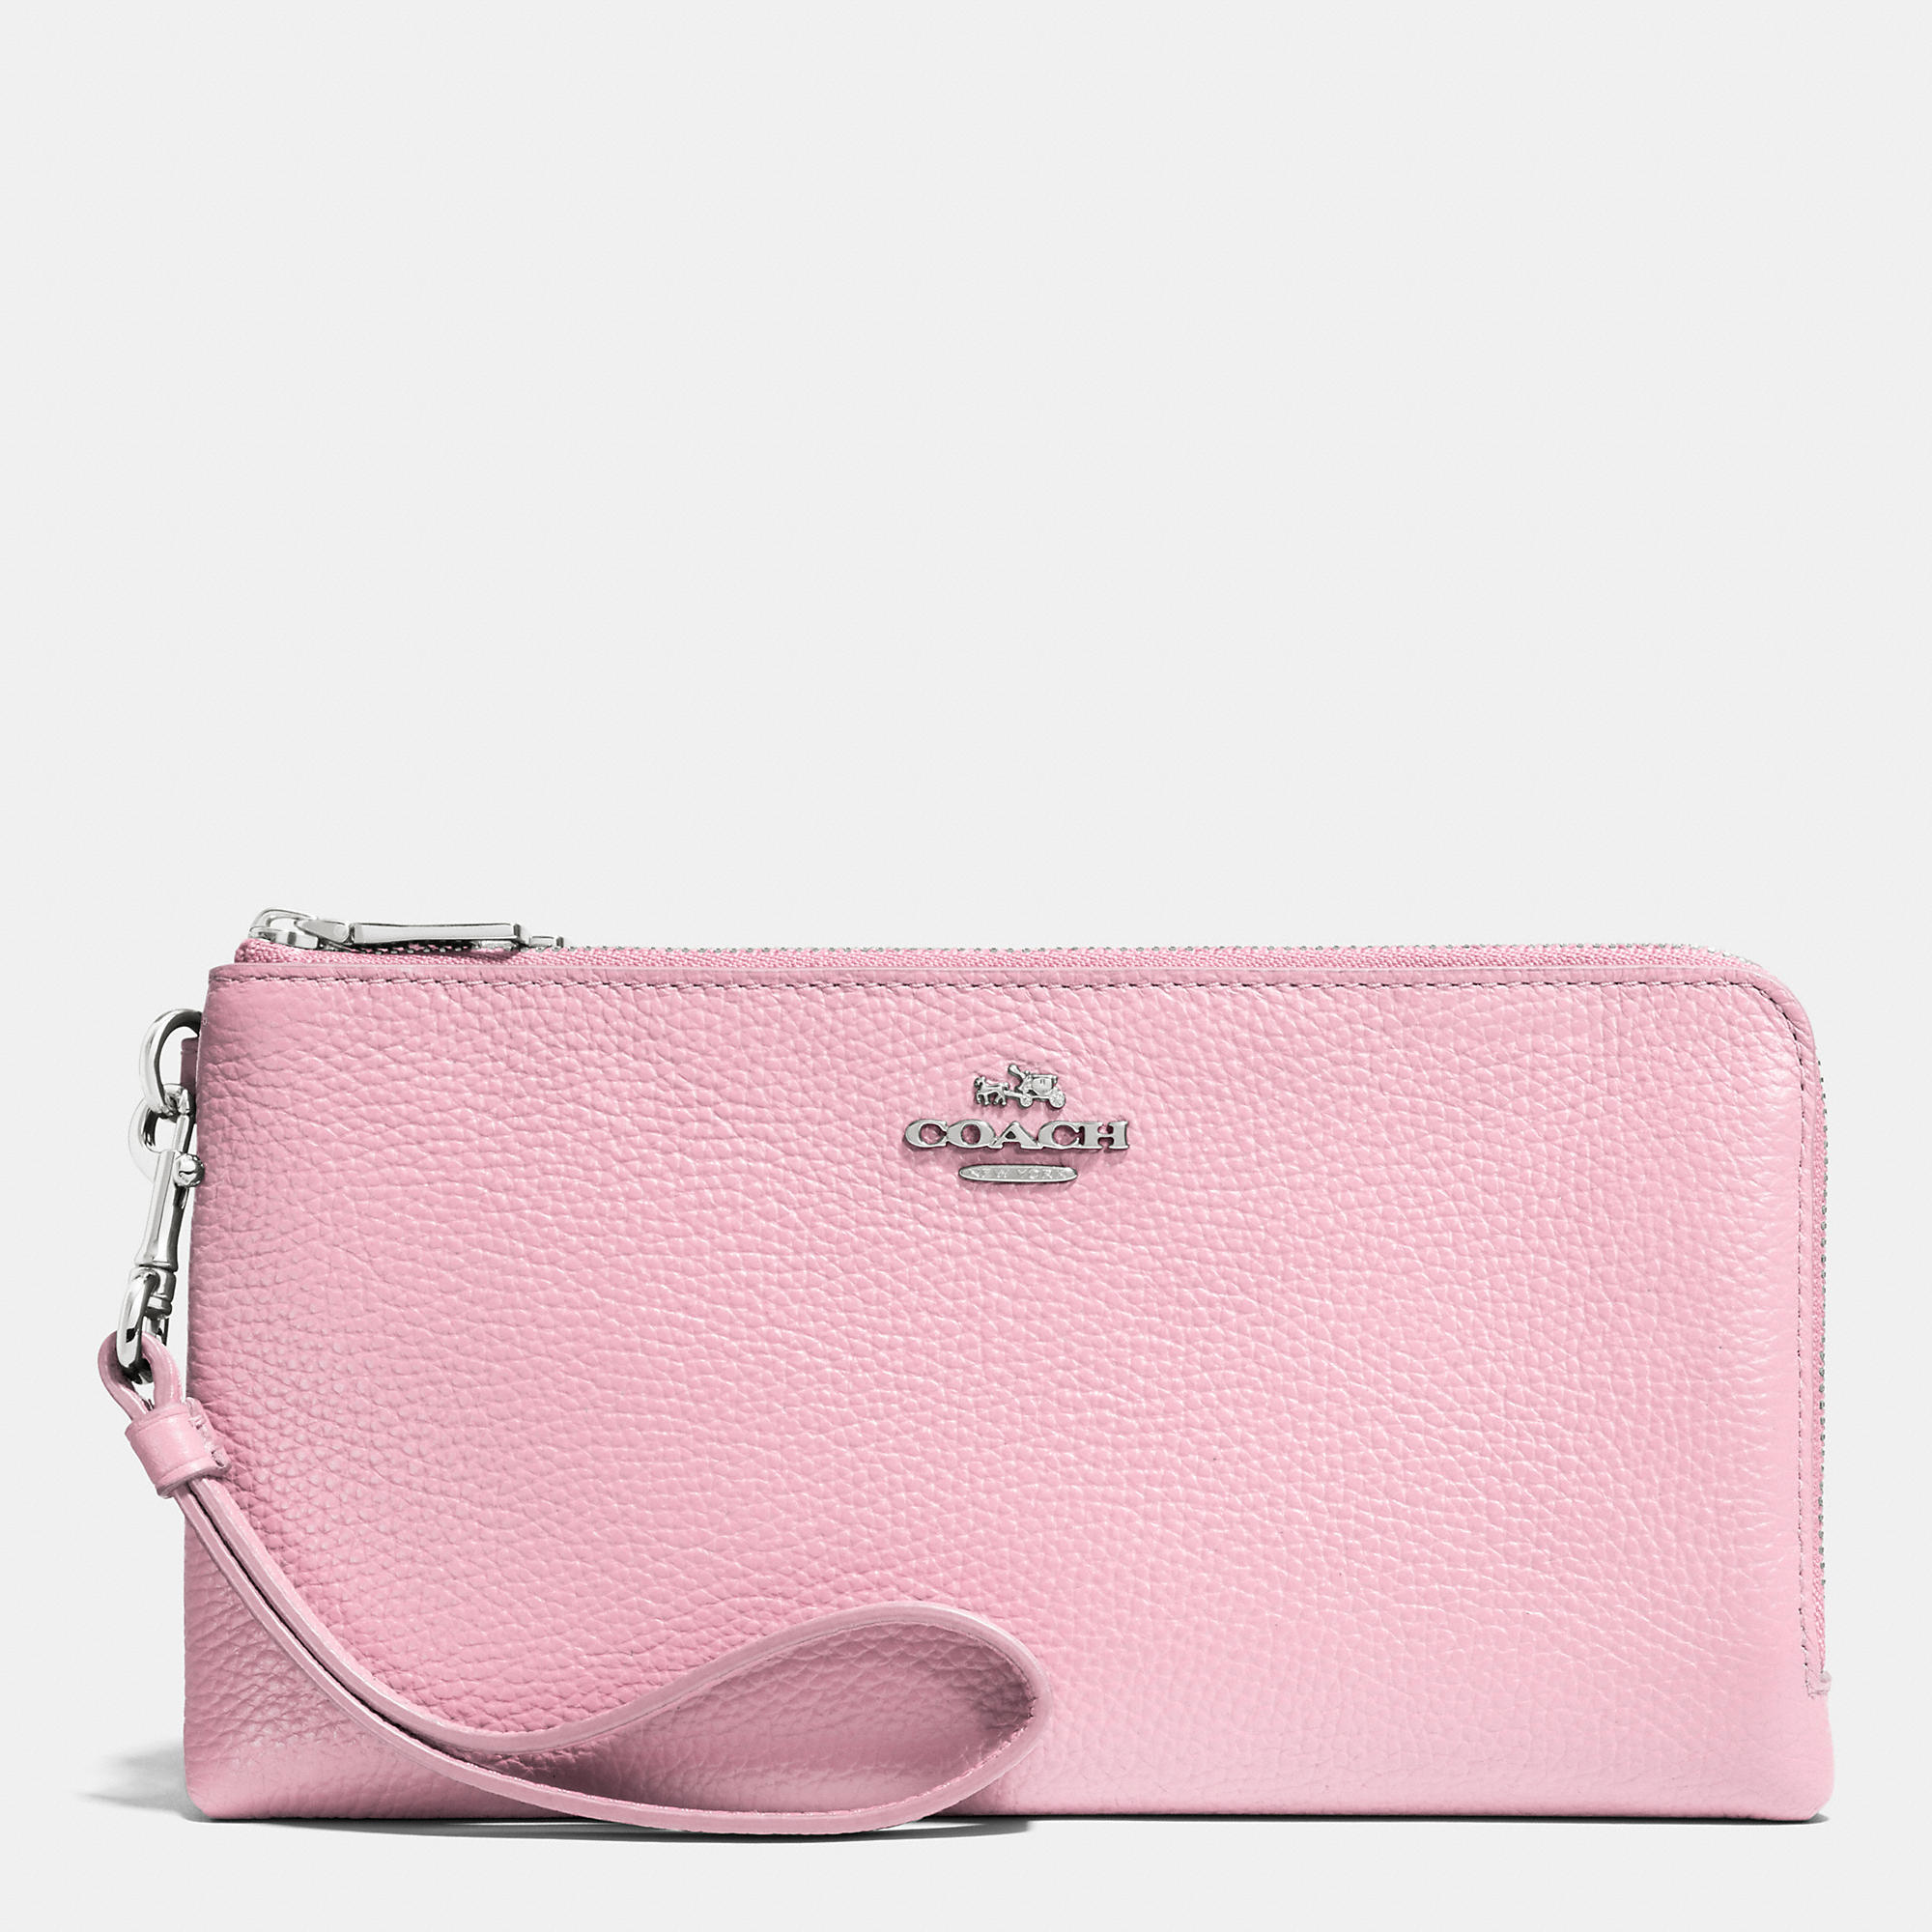 Lyst - Coach Double Zip Wallet In Pebble Leather in Pink